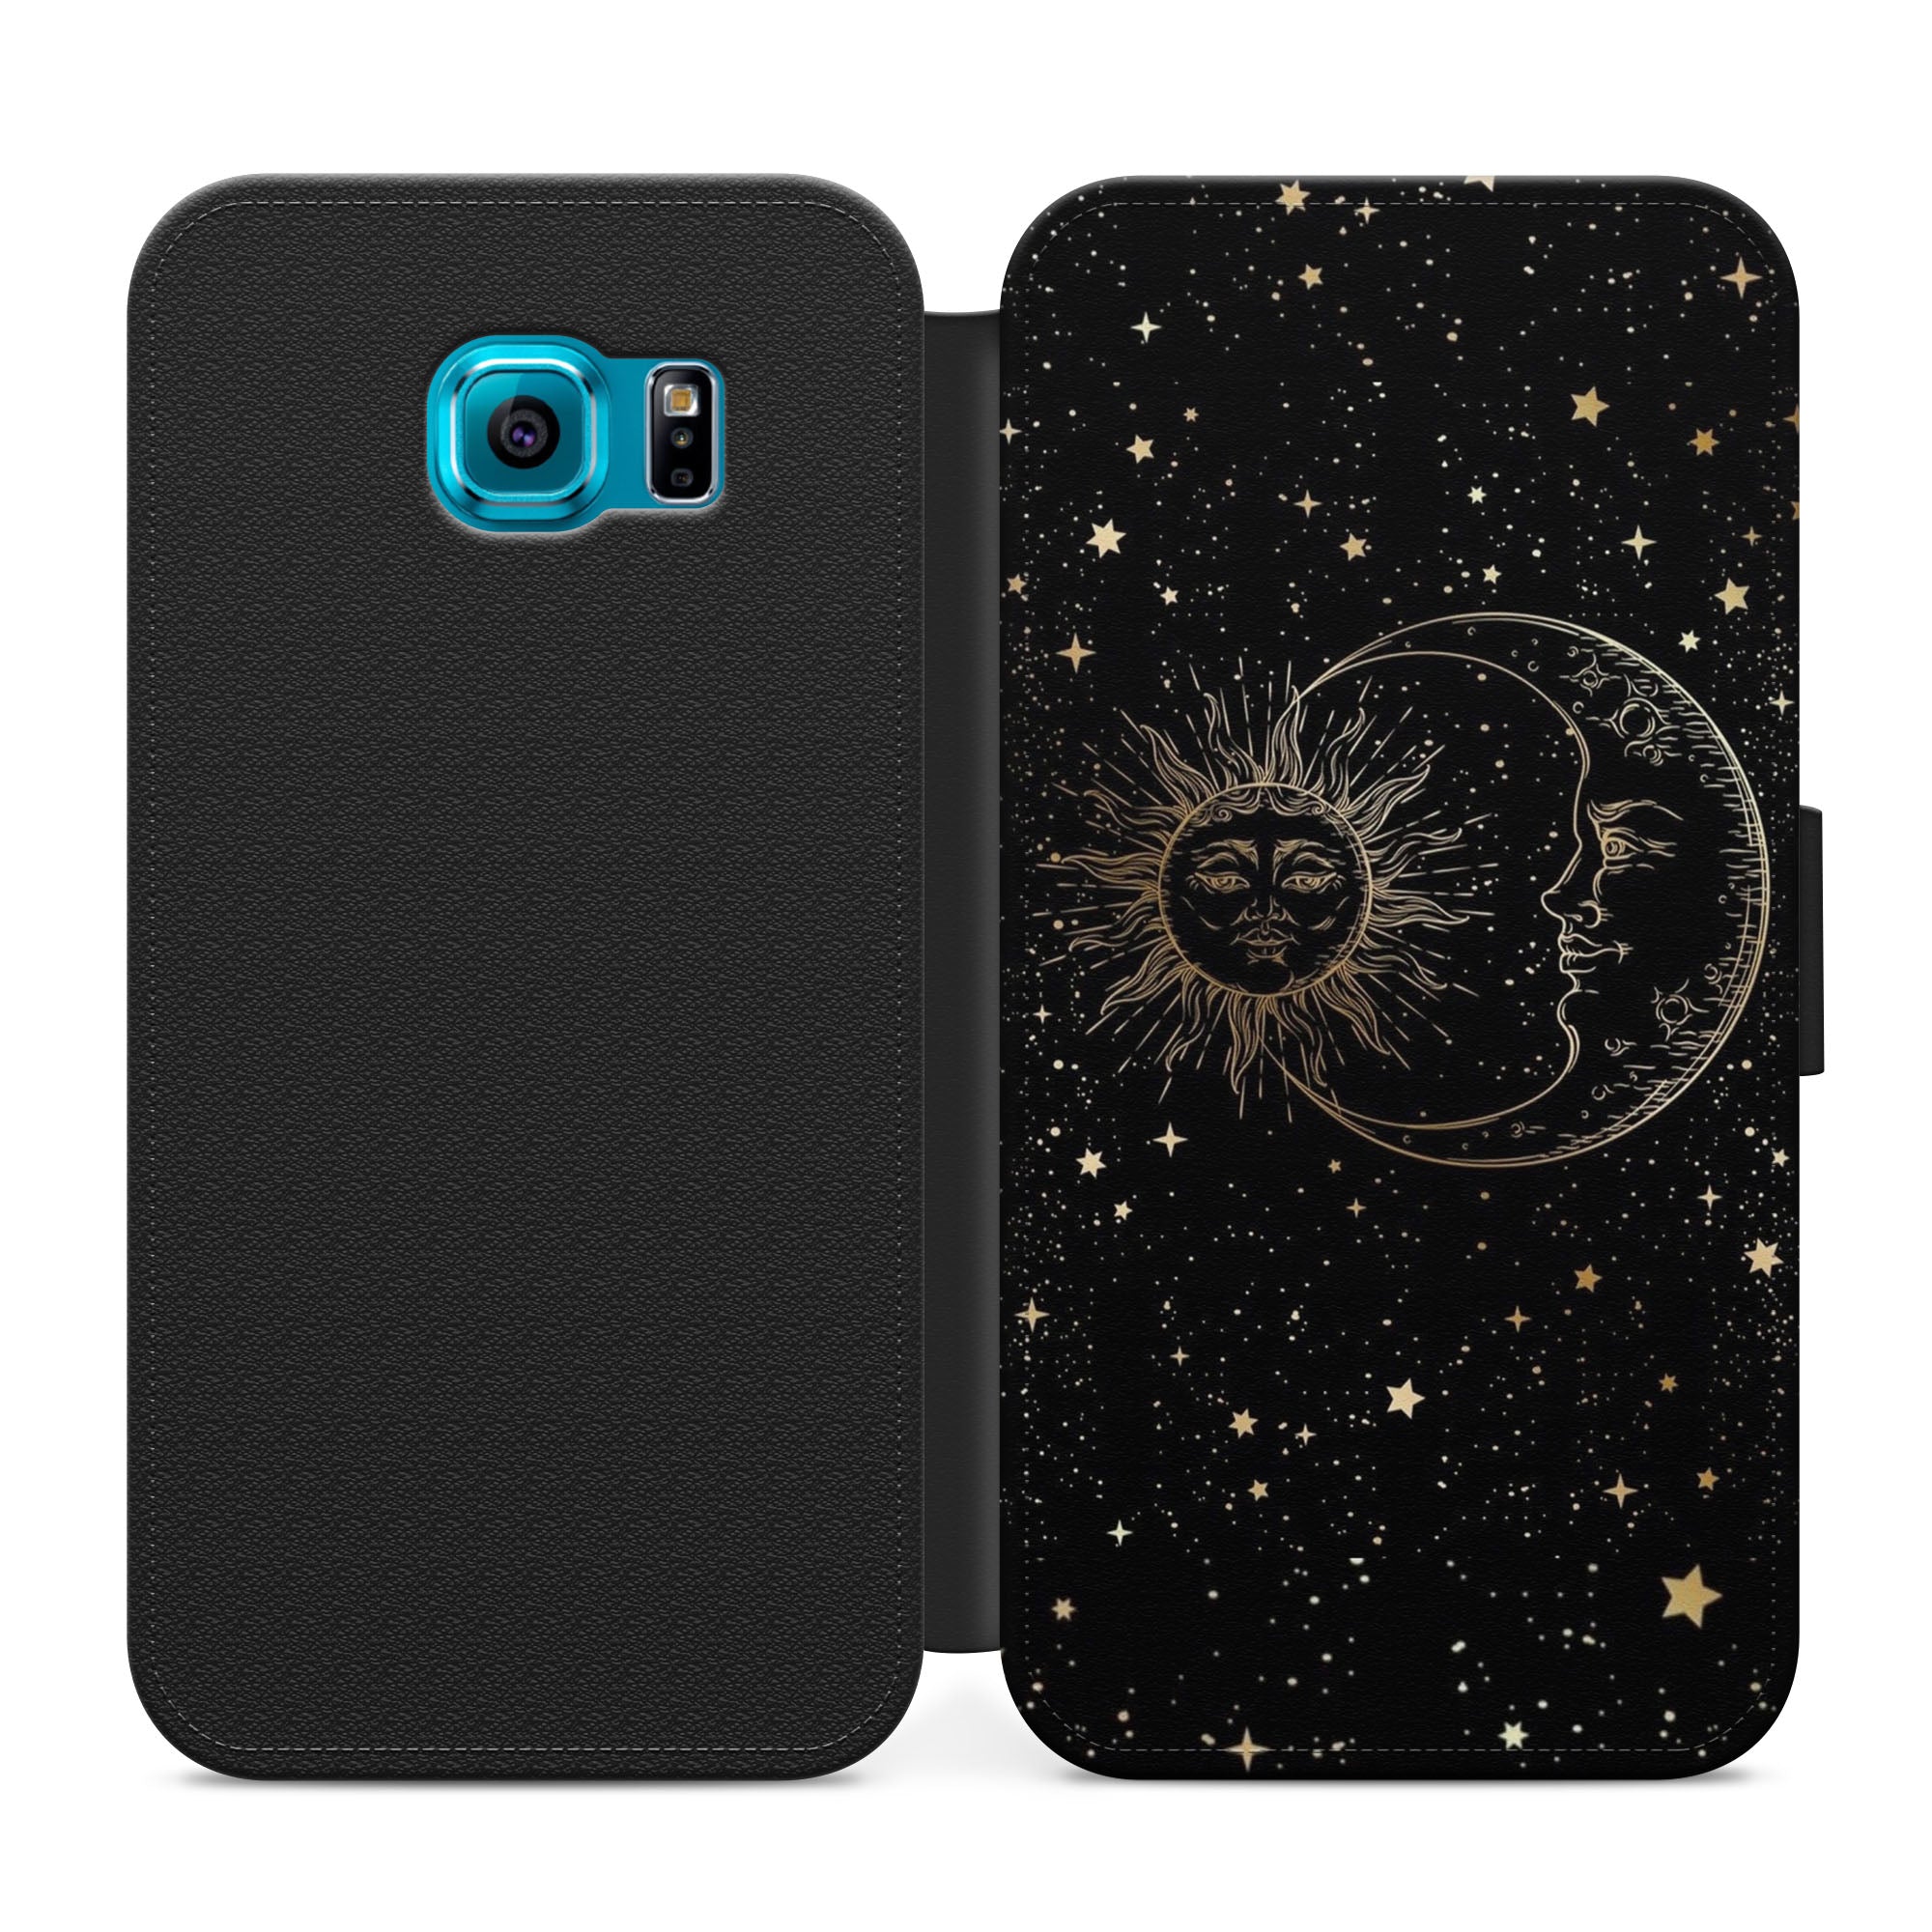 Moons & Stars Faux Leather Flip Case Wallet for iPhone / Samsung